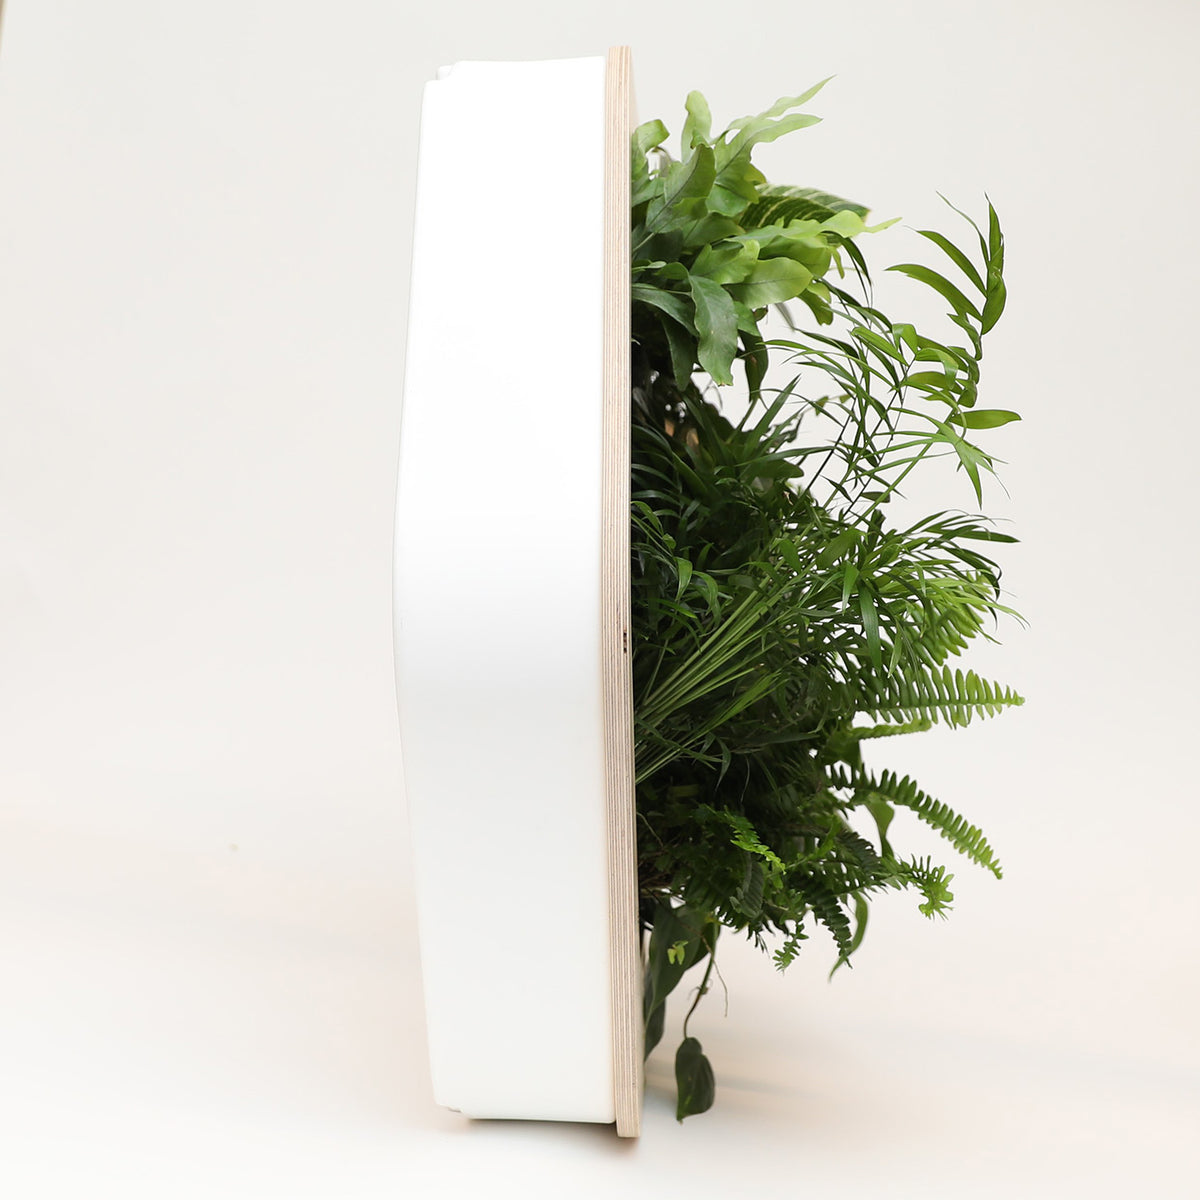 Gromeo x SFMOMA Living Wall assortment, wood frame and lively plants, side view.